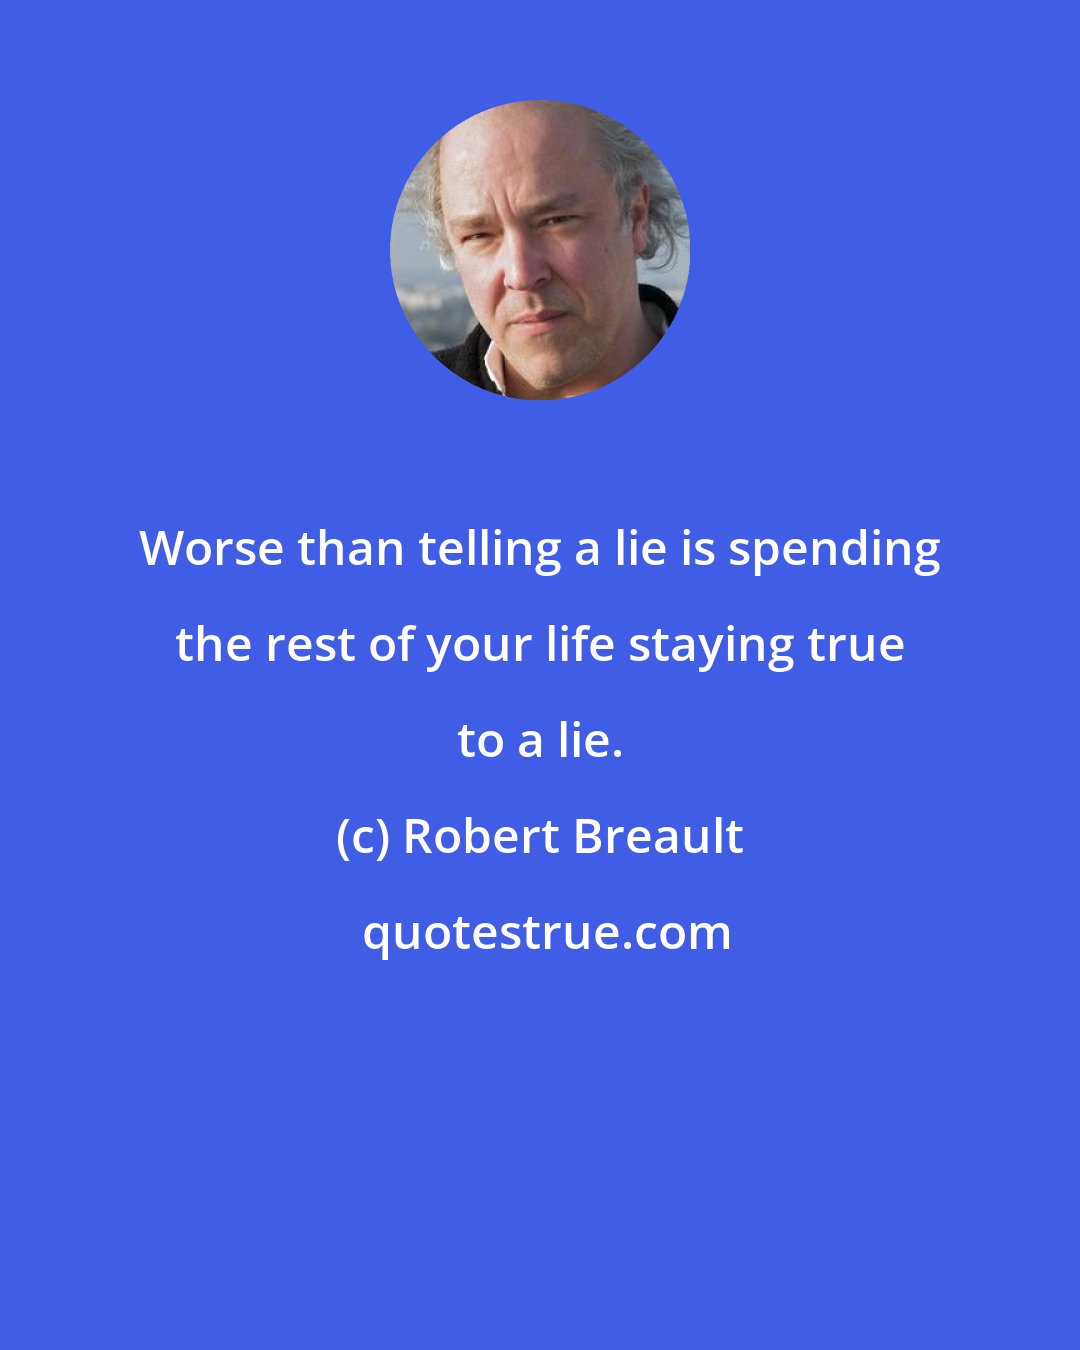 Robert Breault: Worse than telling a lie is spending the rest of your life staying true to a lie.